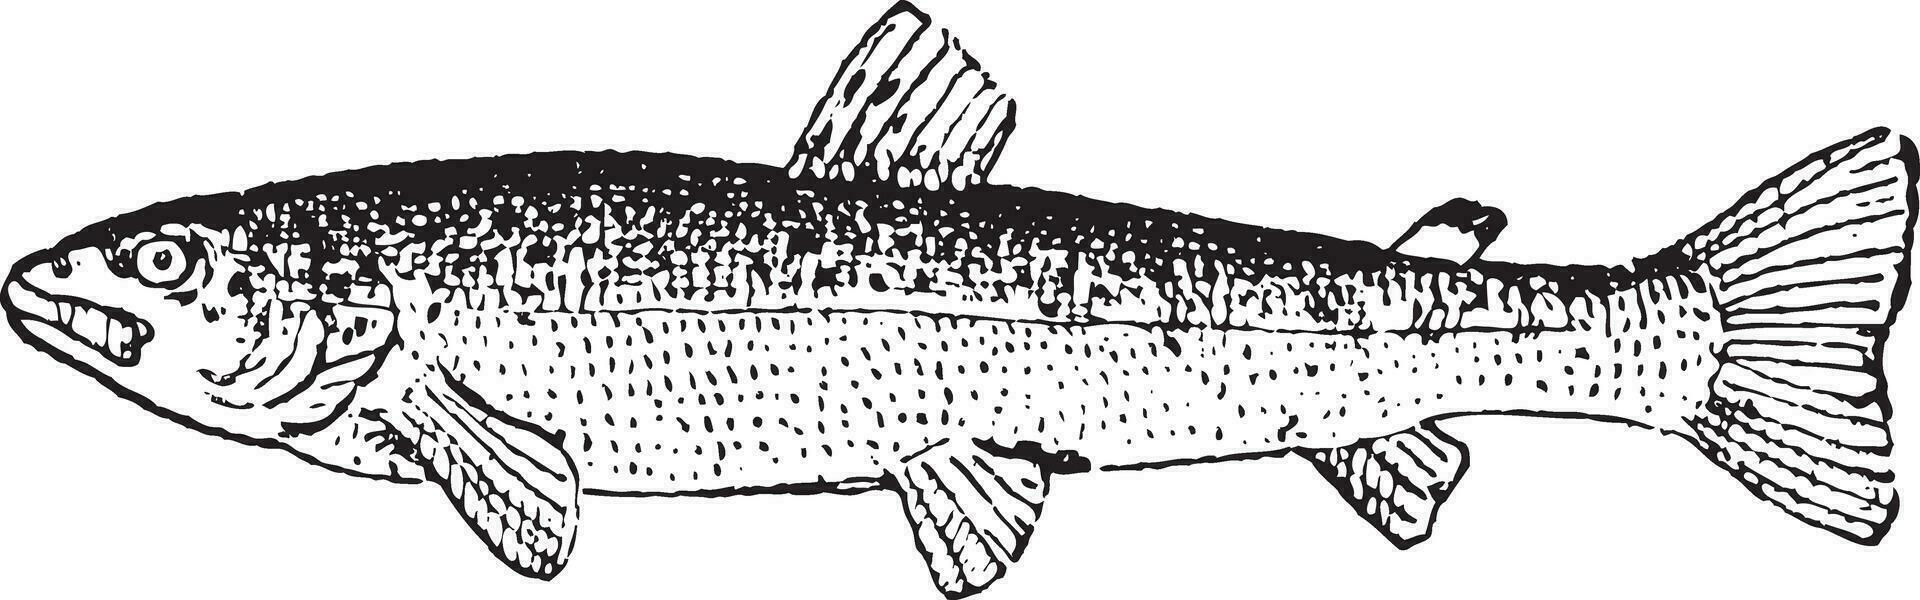 Common Trout or Salmo trutta, vintage engraving vector